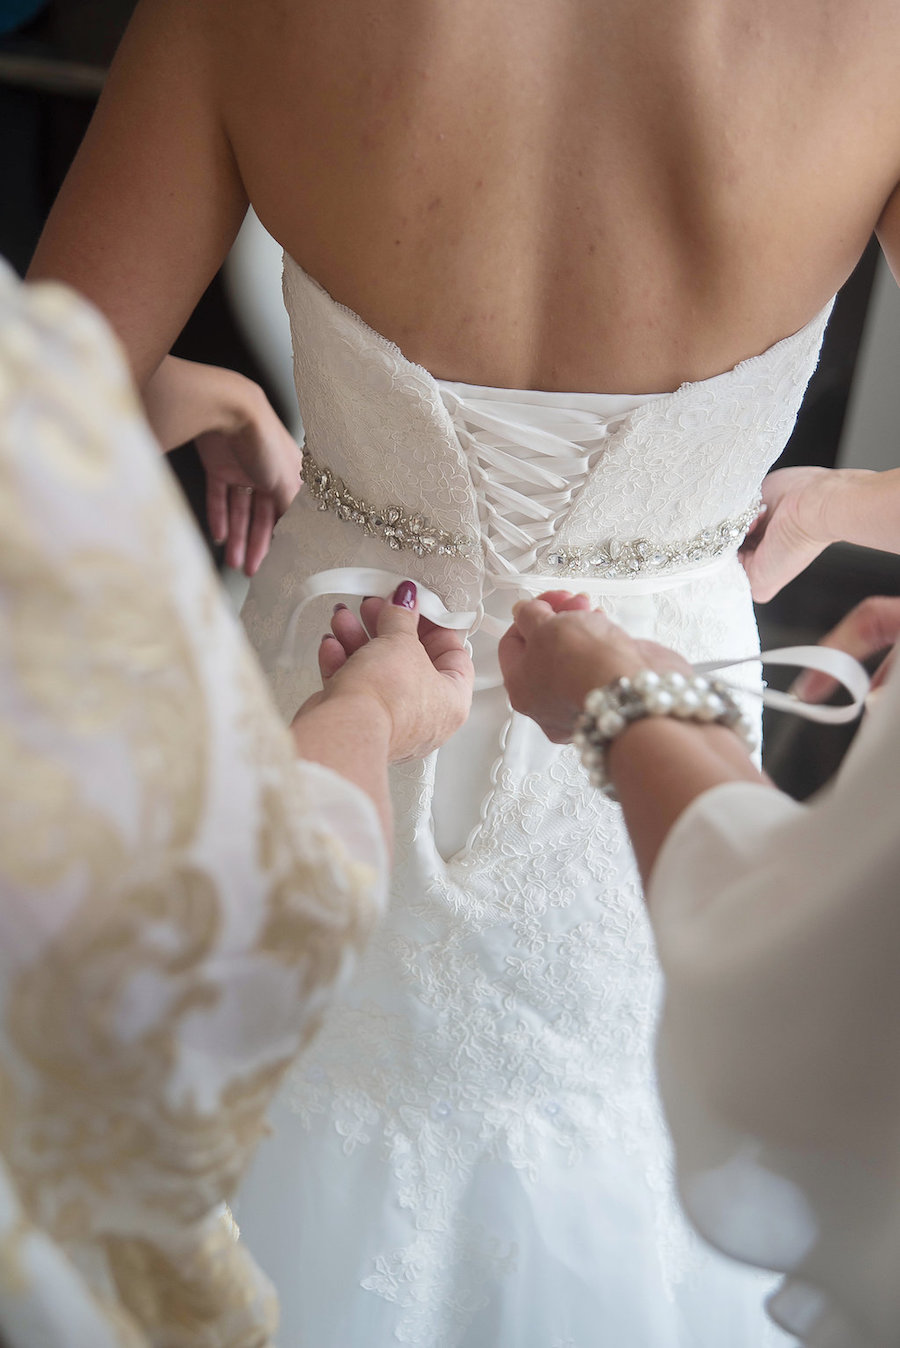 Bride Getting Dressed/Ready | Cream Lace Trumpet Style Wedding Dress with Rhinestone Belt and Lace Up Corset Back | St. Petersburg Wedding Photographer Kristen Marie Photography